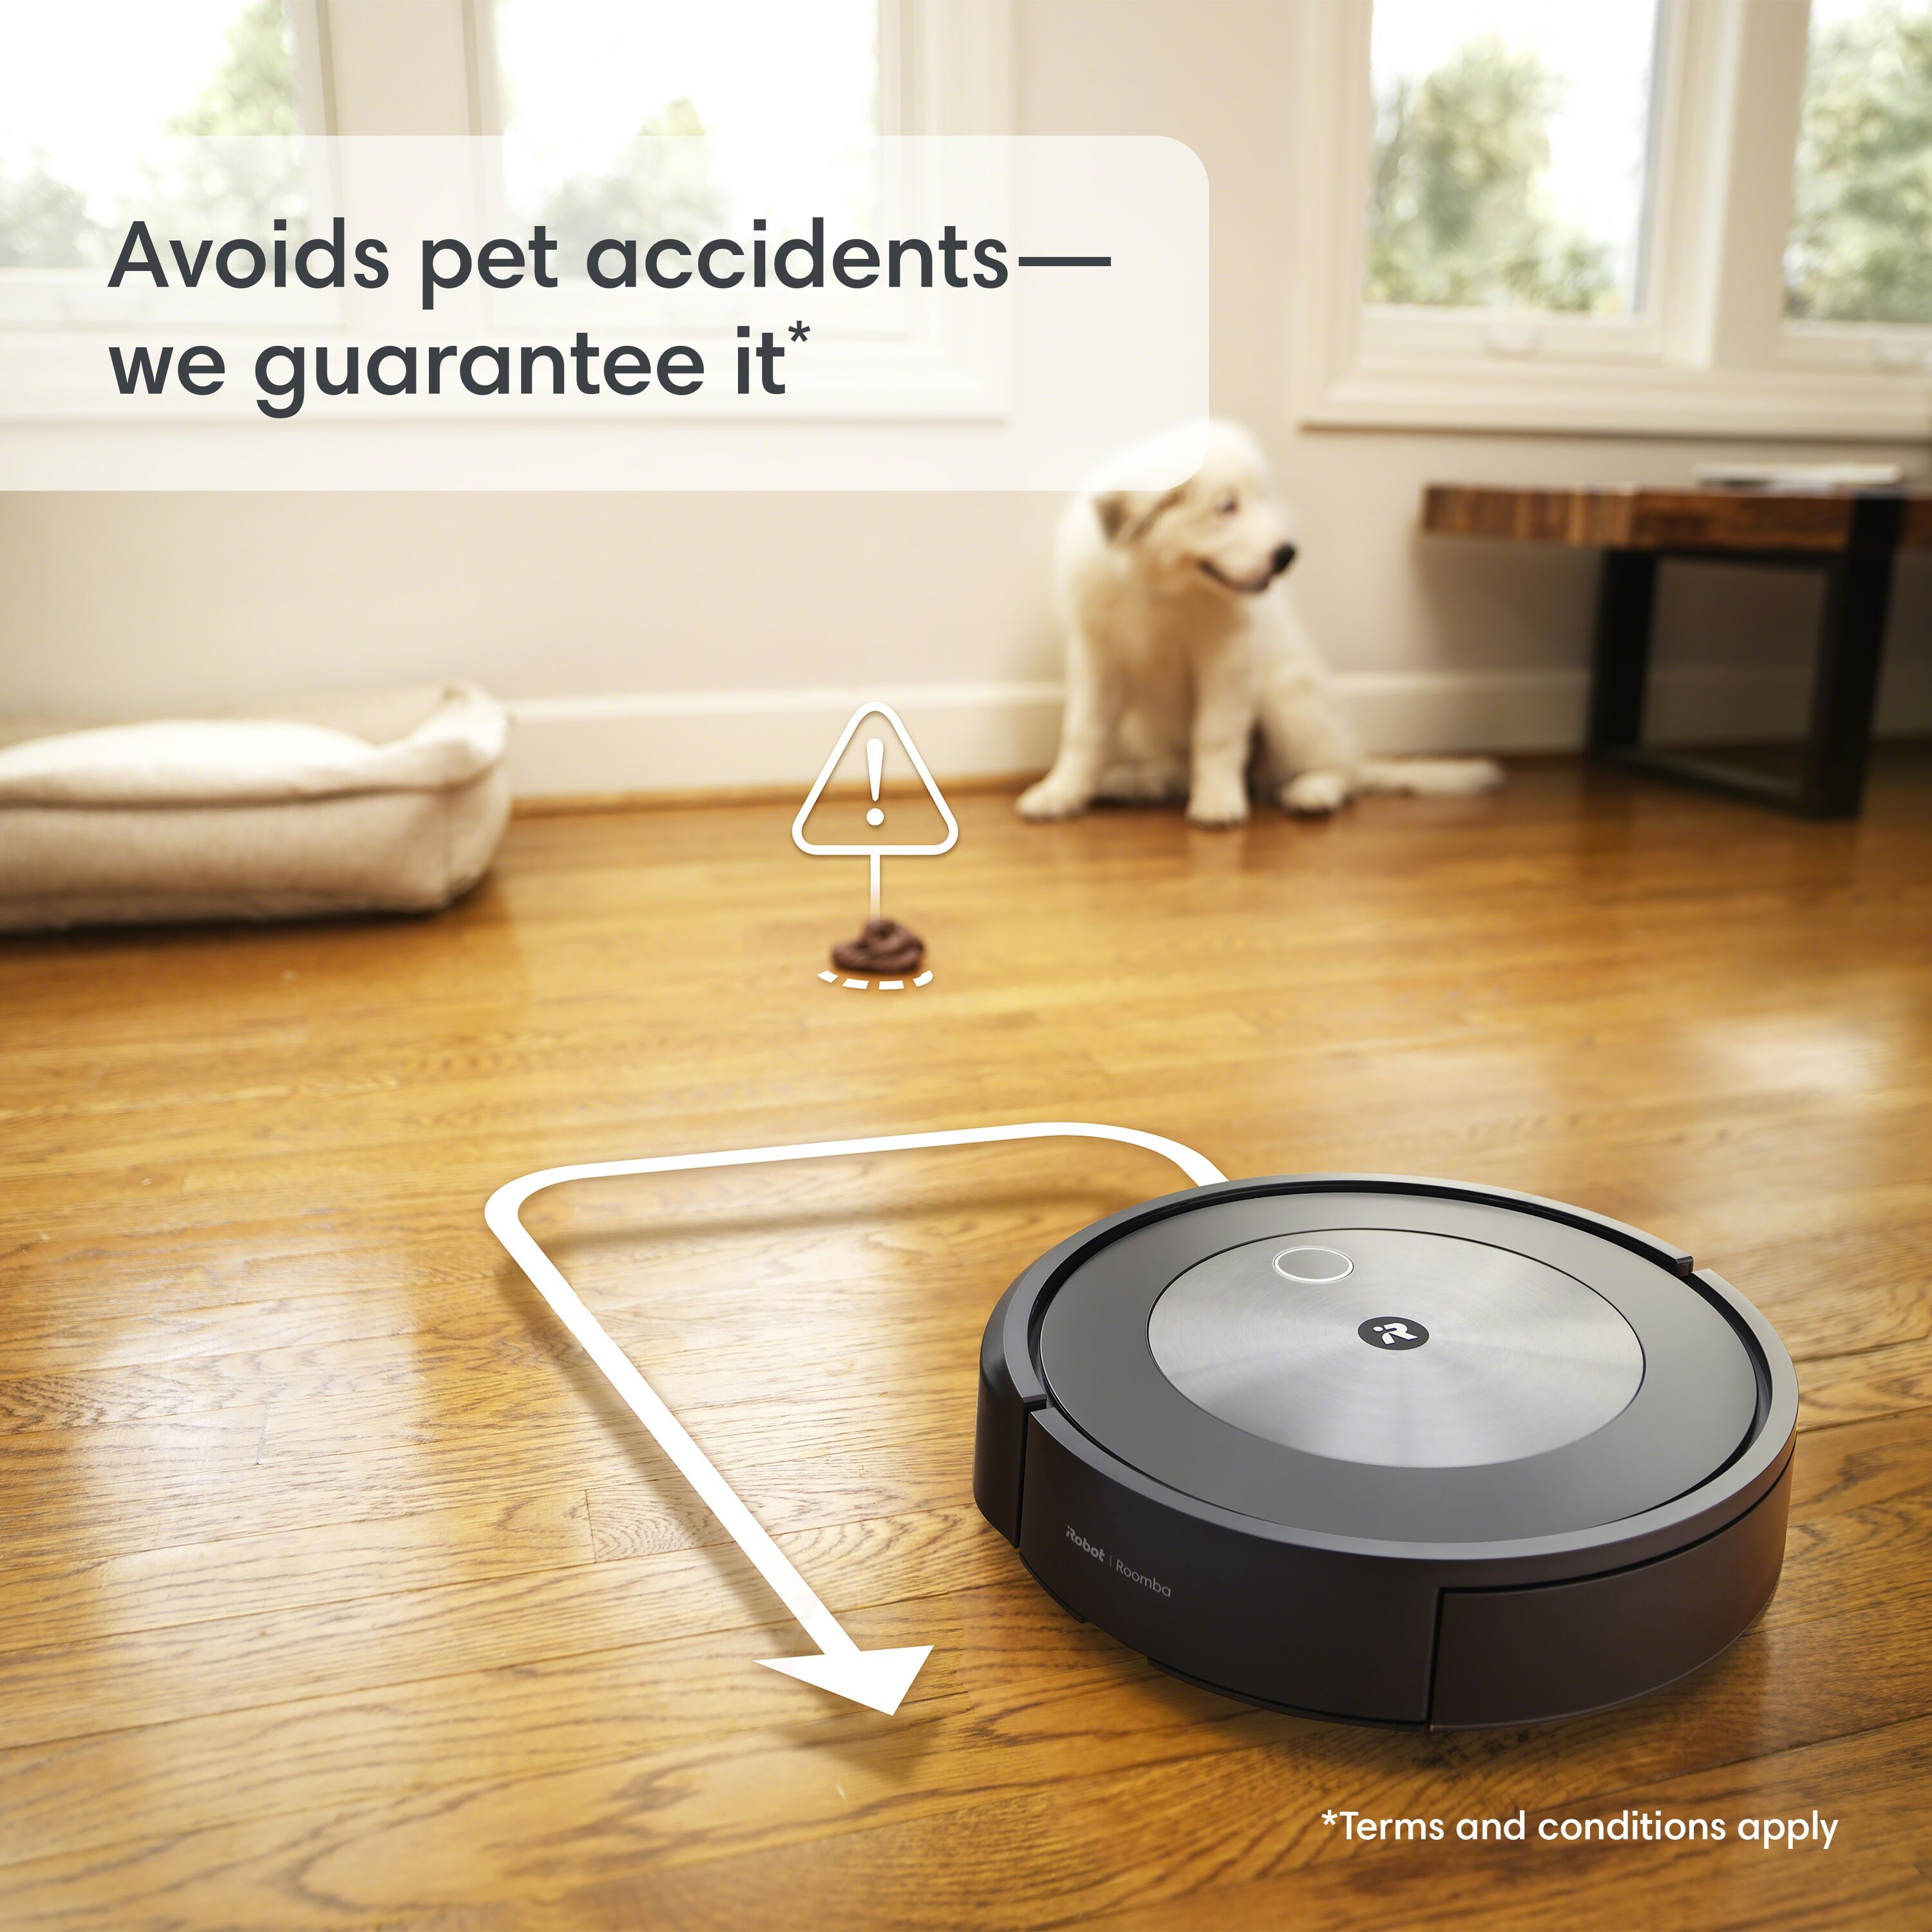 iRobot drops its first-ever combo mop and vacuum robot, the Roomba Combo  j7+